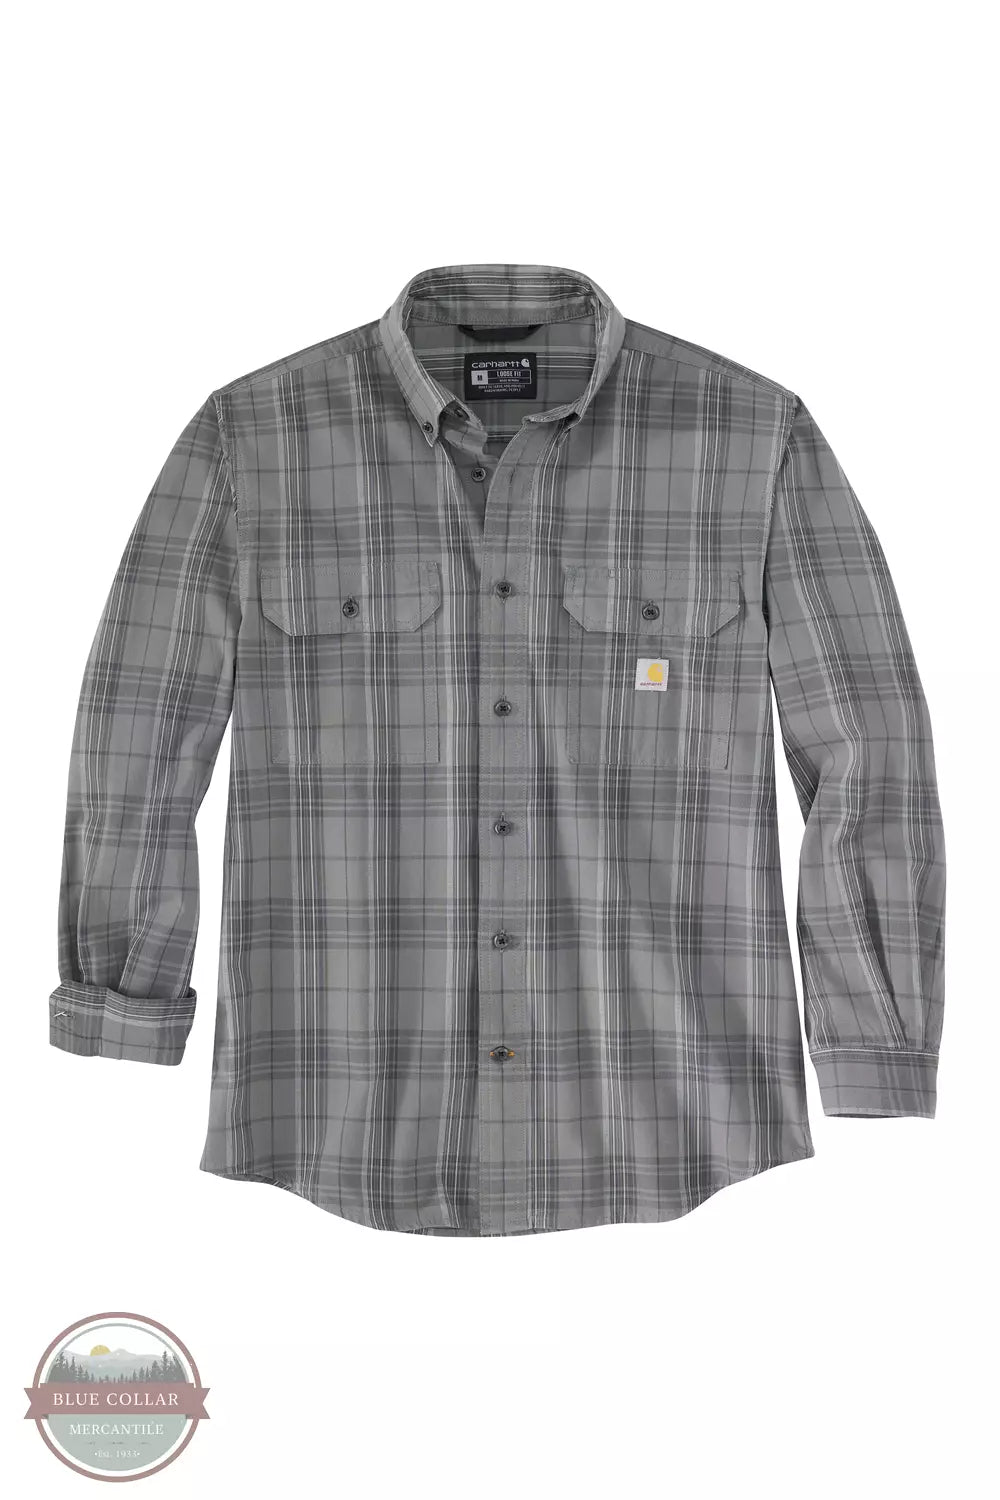 Carhartt 105946 Loose Fit Midweight Chambray Button Down Long Sleeve Shirt in Plaid Steel Front View